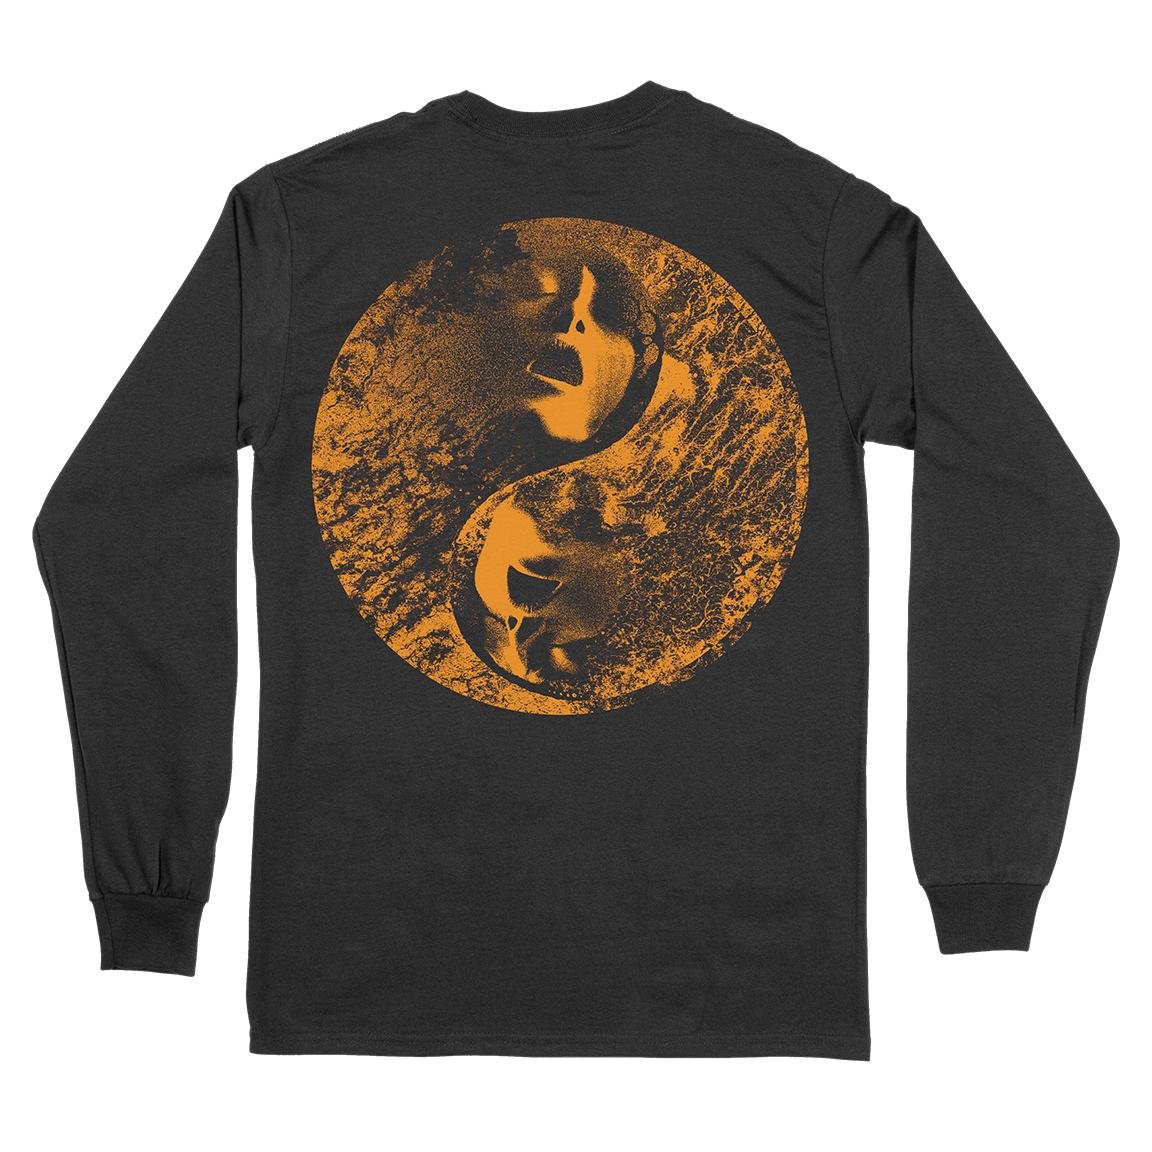 END - Gather & Mourn Long Sleeve Gold